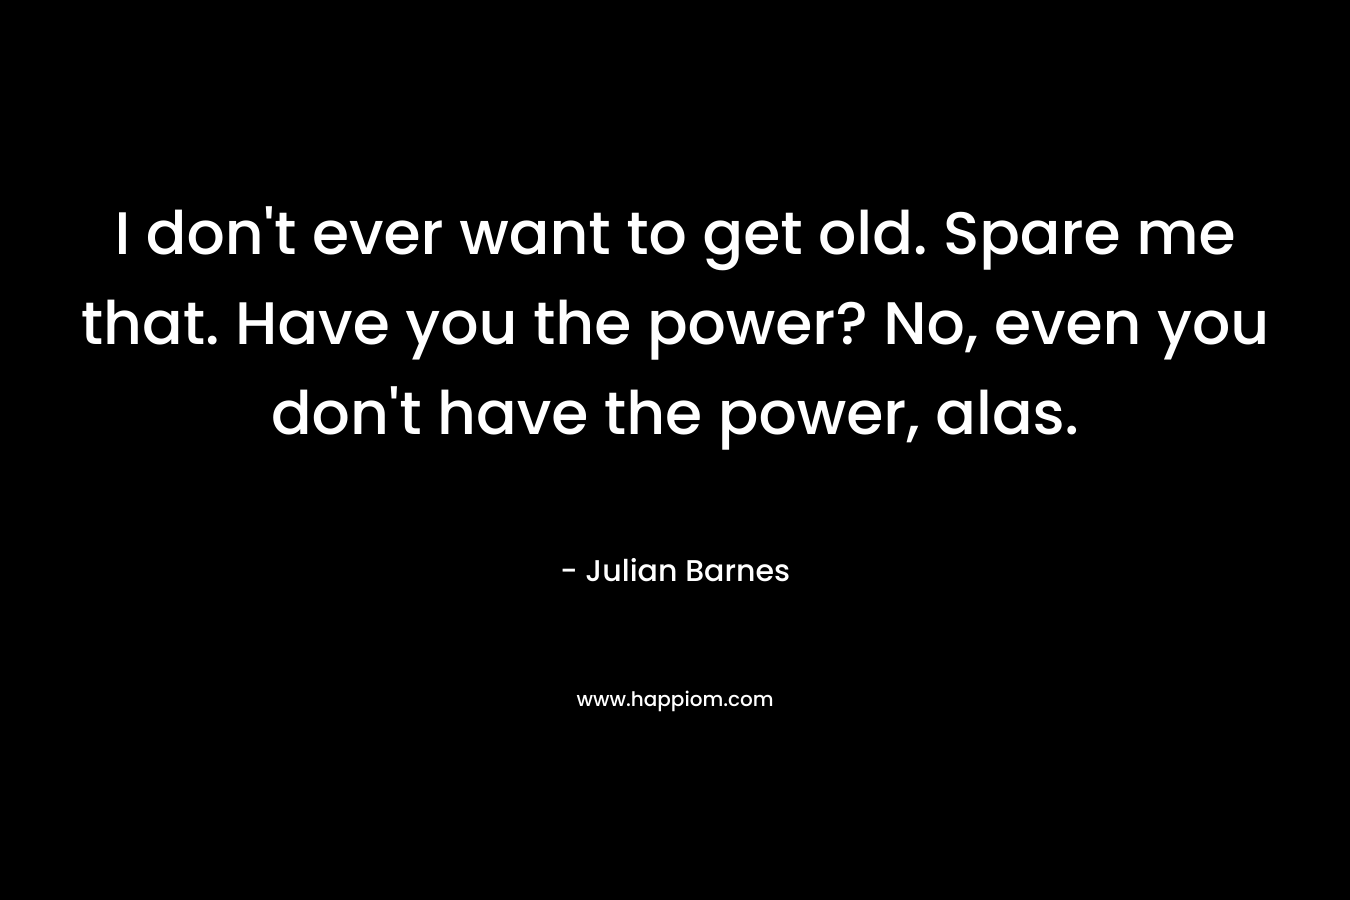 I don't ever want to get old. Spare me that. Have you the power? No, even you don't have the power, alas.